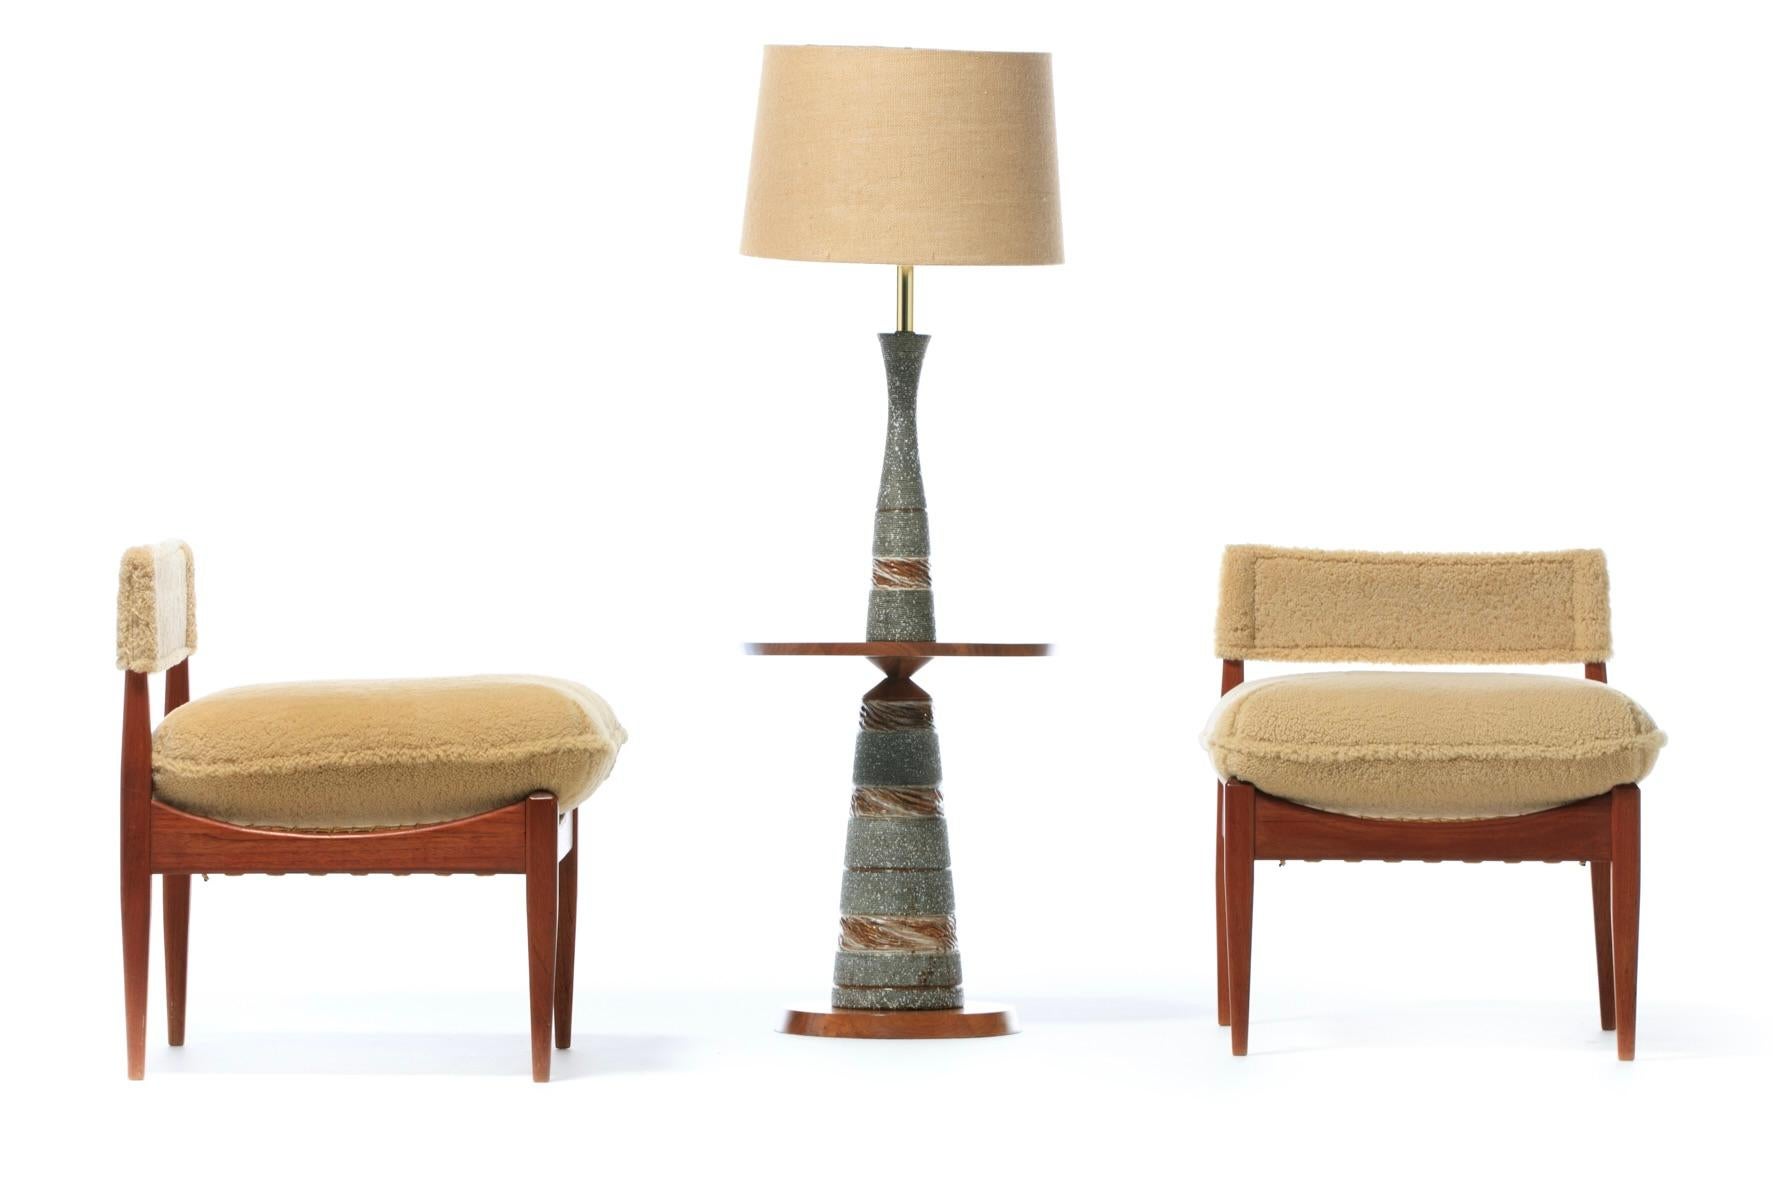 Stylish pair of Kristian Vedel attributed low profile Danish Modern lounge chairs newly professionally upholstered in super soft hand sewn Palomino Shearling. If you're an admirer of furnishings that when you walk into a room sort of wink at you and